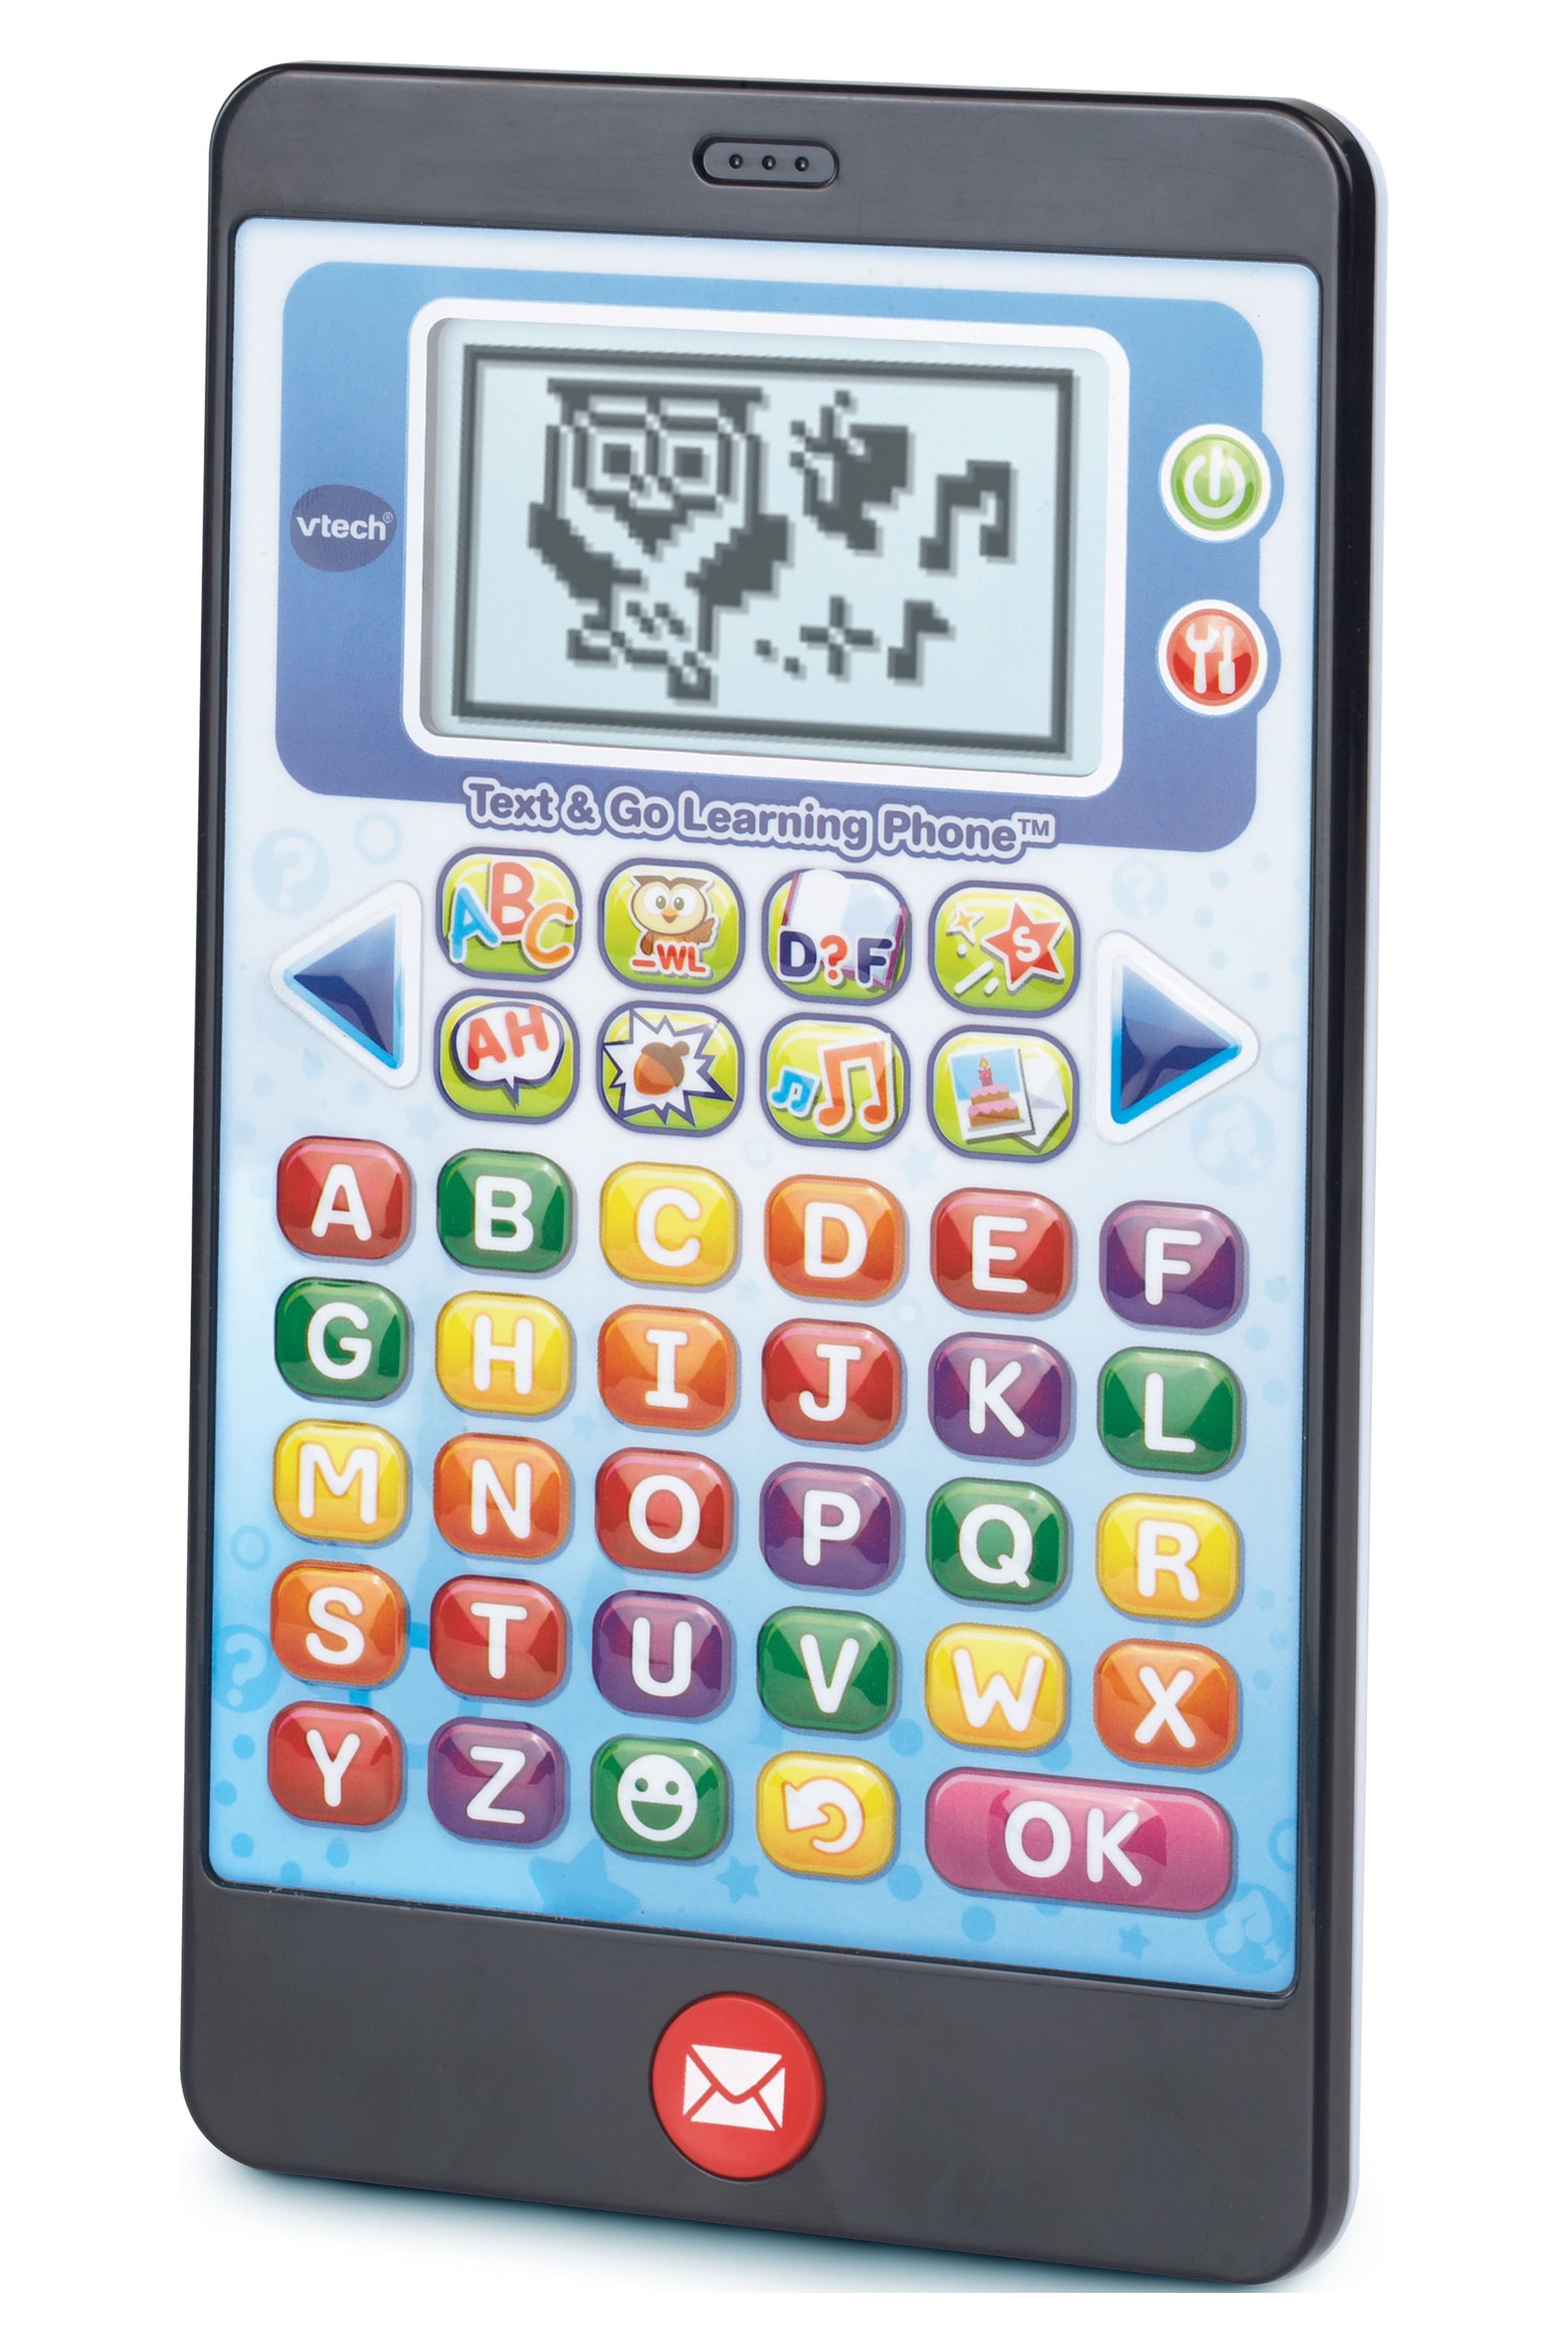 VTech Text and Go Learning Phone, Great Teaching Toy for Toddlers - image 1 of 6